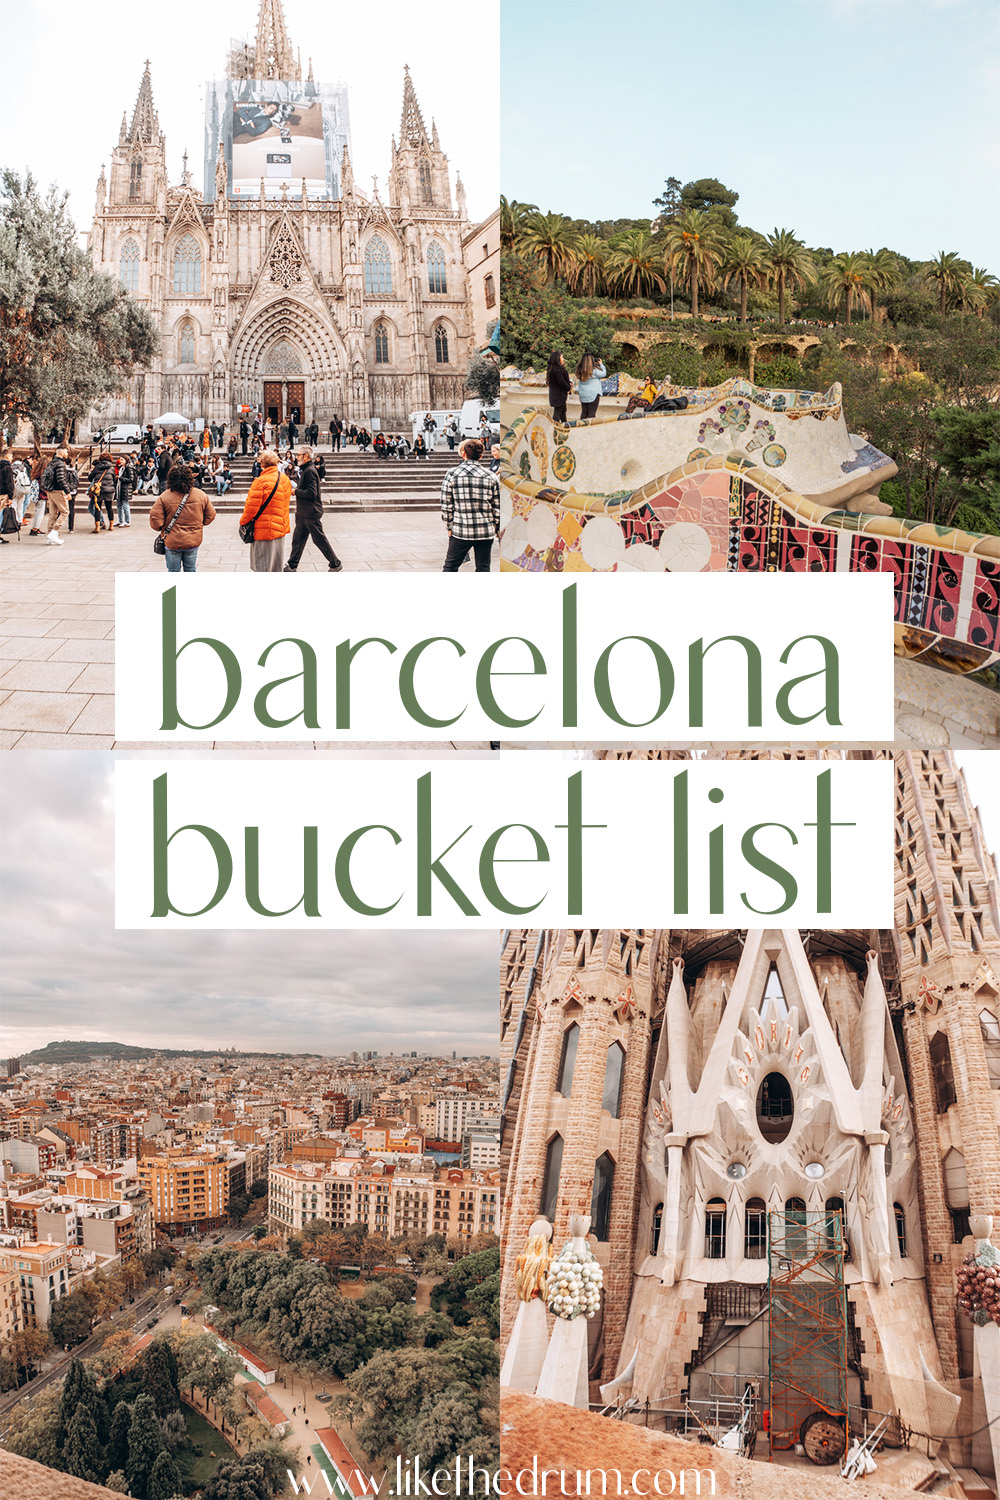 Barcelona Bucket List - The best things to do in Barcelona